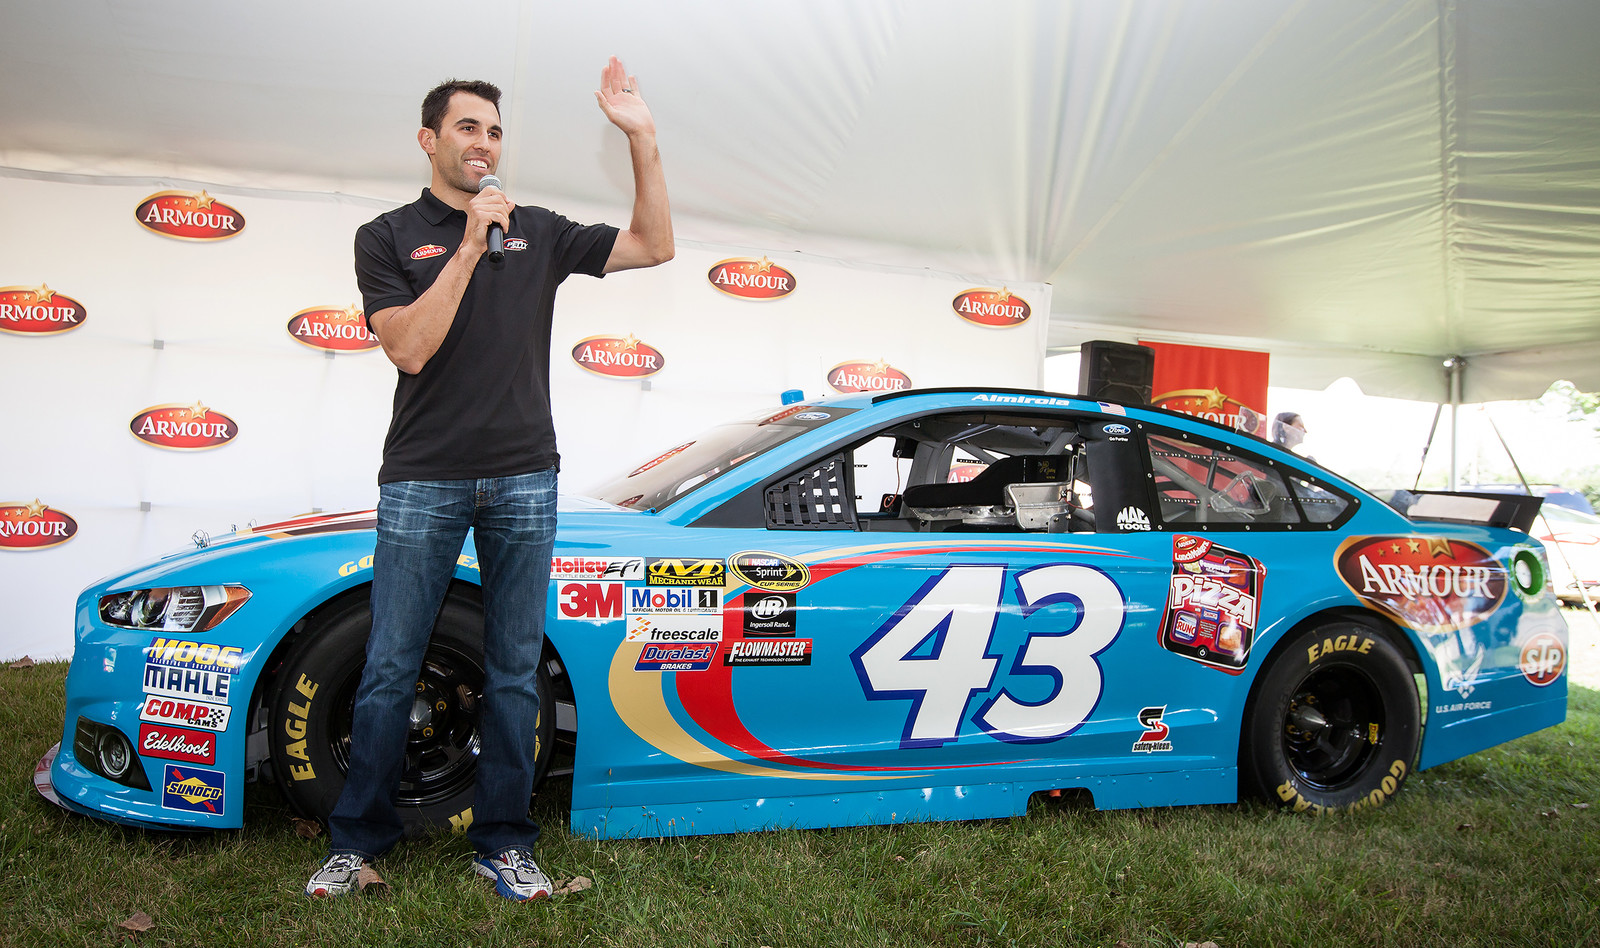 Aric Almirola posing with the #43 Armour Meats Ford Fusion during an appearance event at Holmes Elementary School on August 12th, 2015.
(Photo credit: Brad Schloss Photographic, Smithfield Foods)